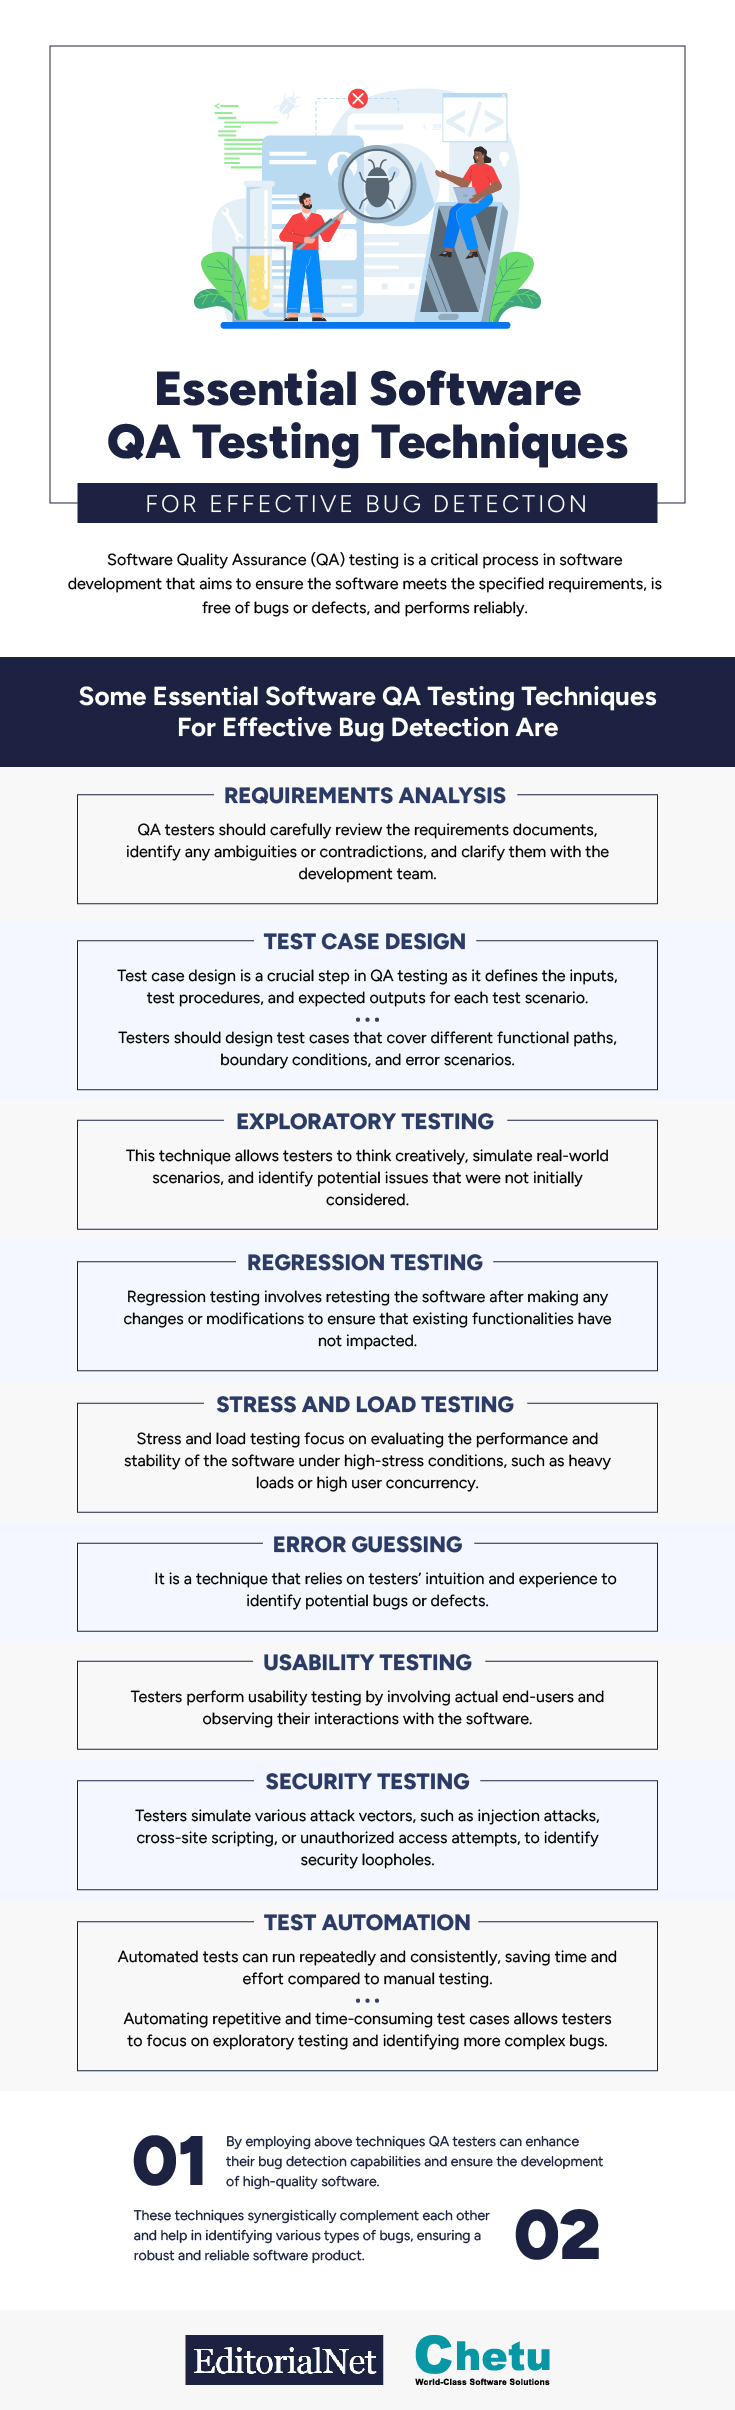 Essential Software QA Testing Techniques for Effective Bug Detection-01